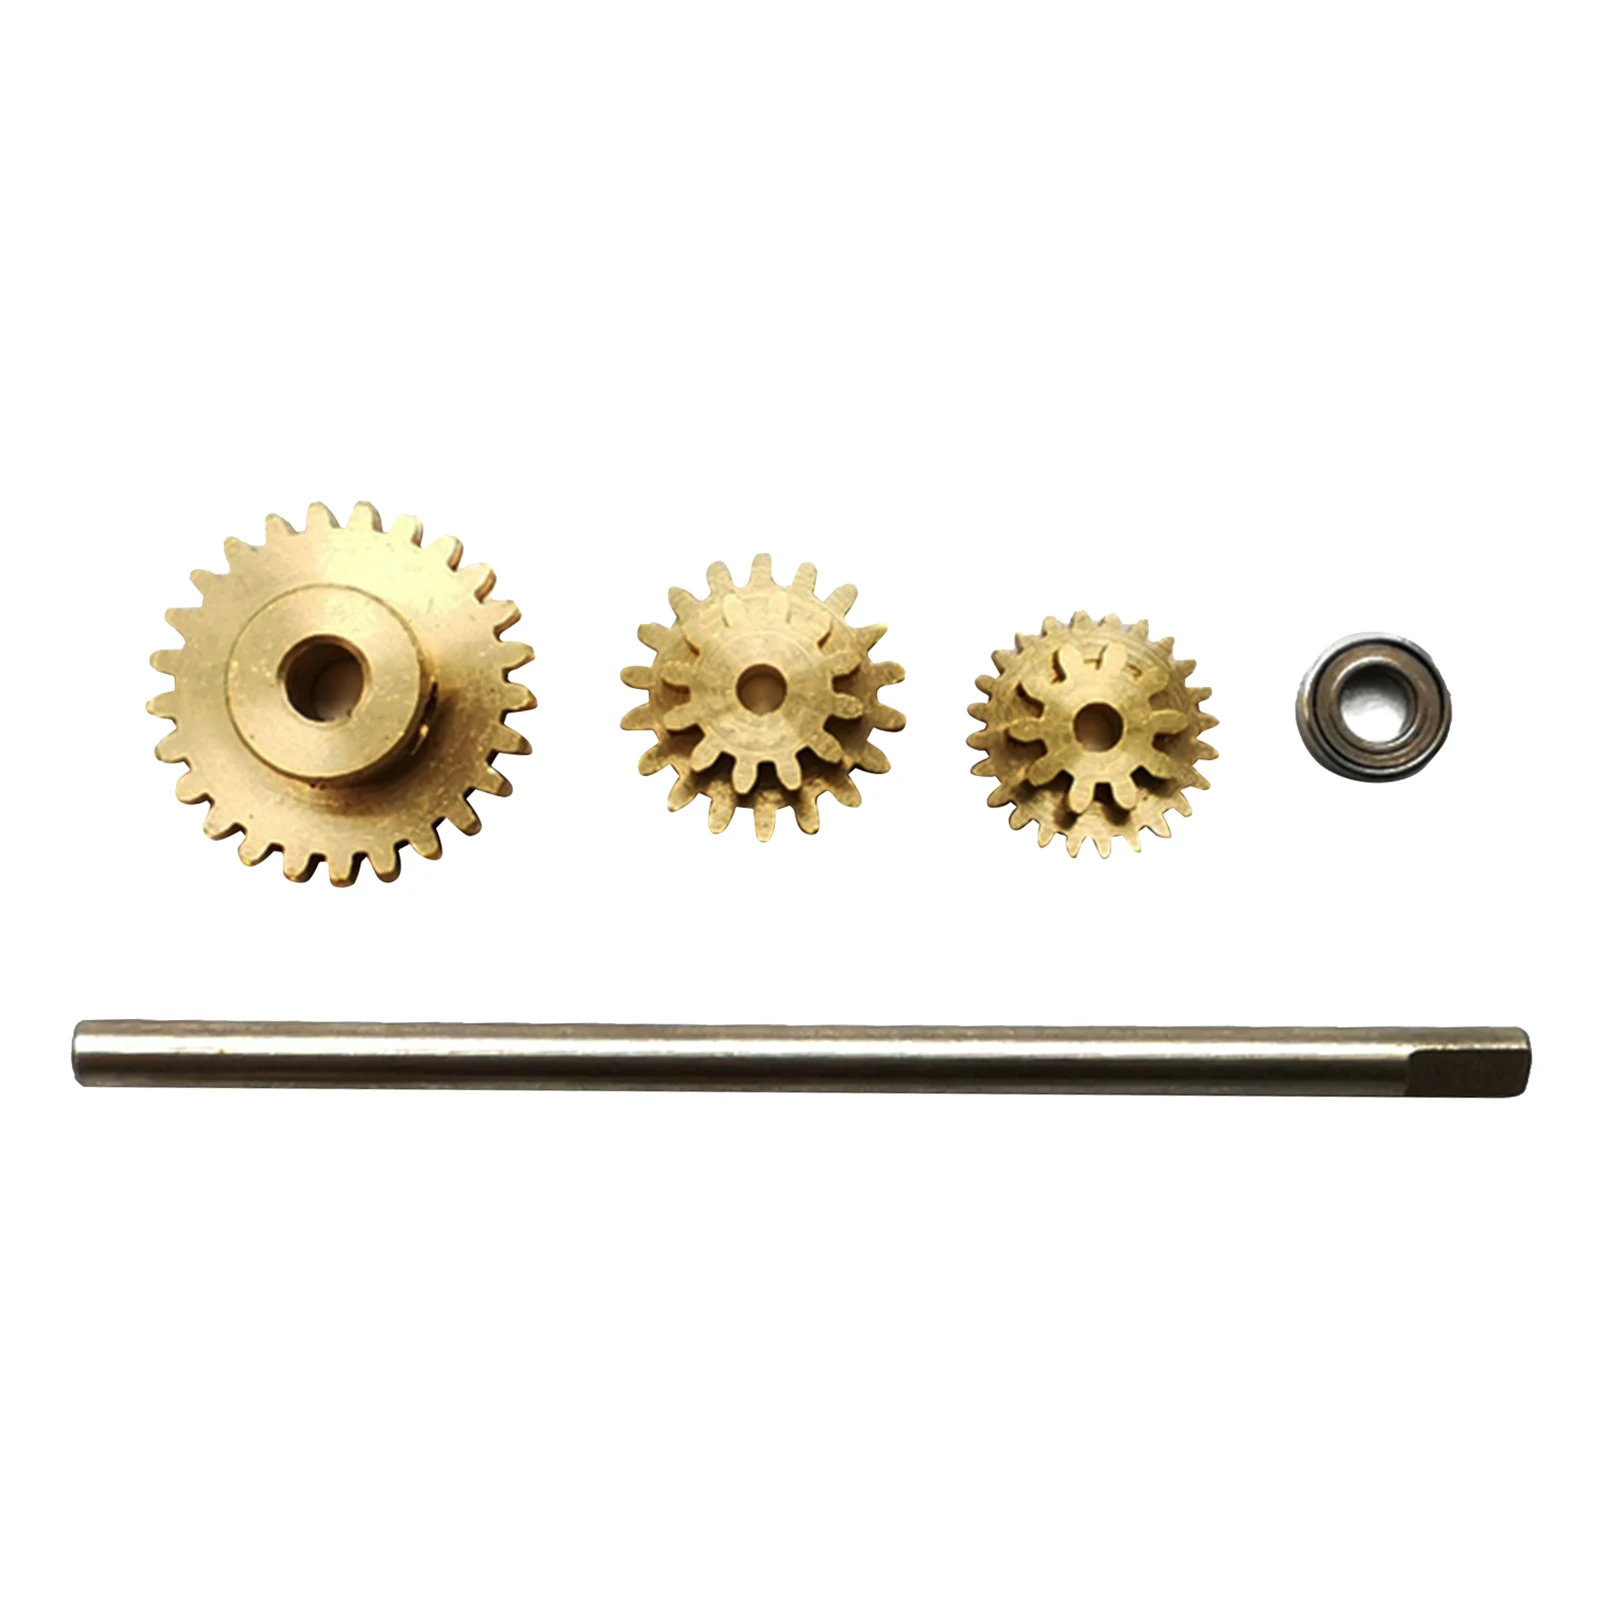 Vgoohobby RC Steel Transmission Gear Set 26T 19T 24T Upgrade Parts Compatible with WPL D12 1/10 Scale RC Trucks 